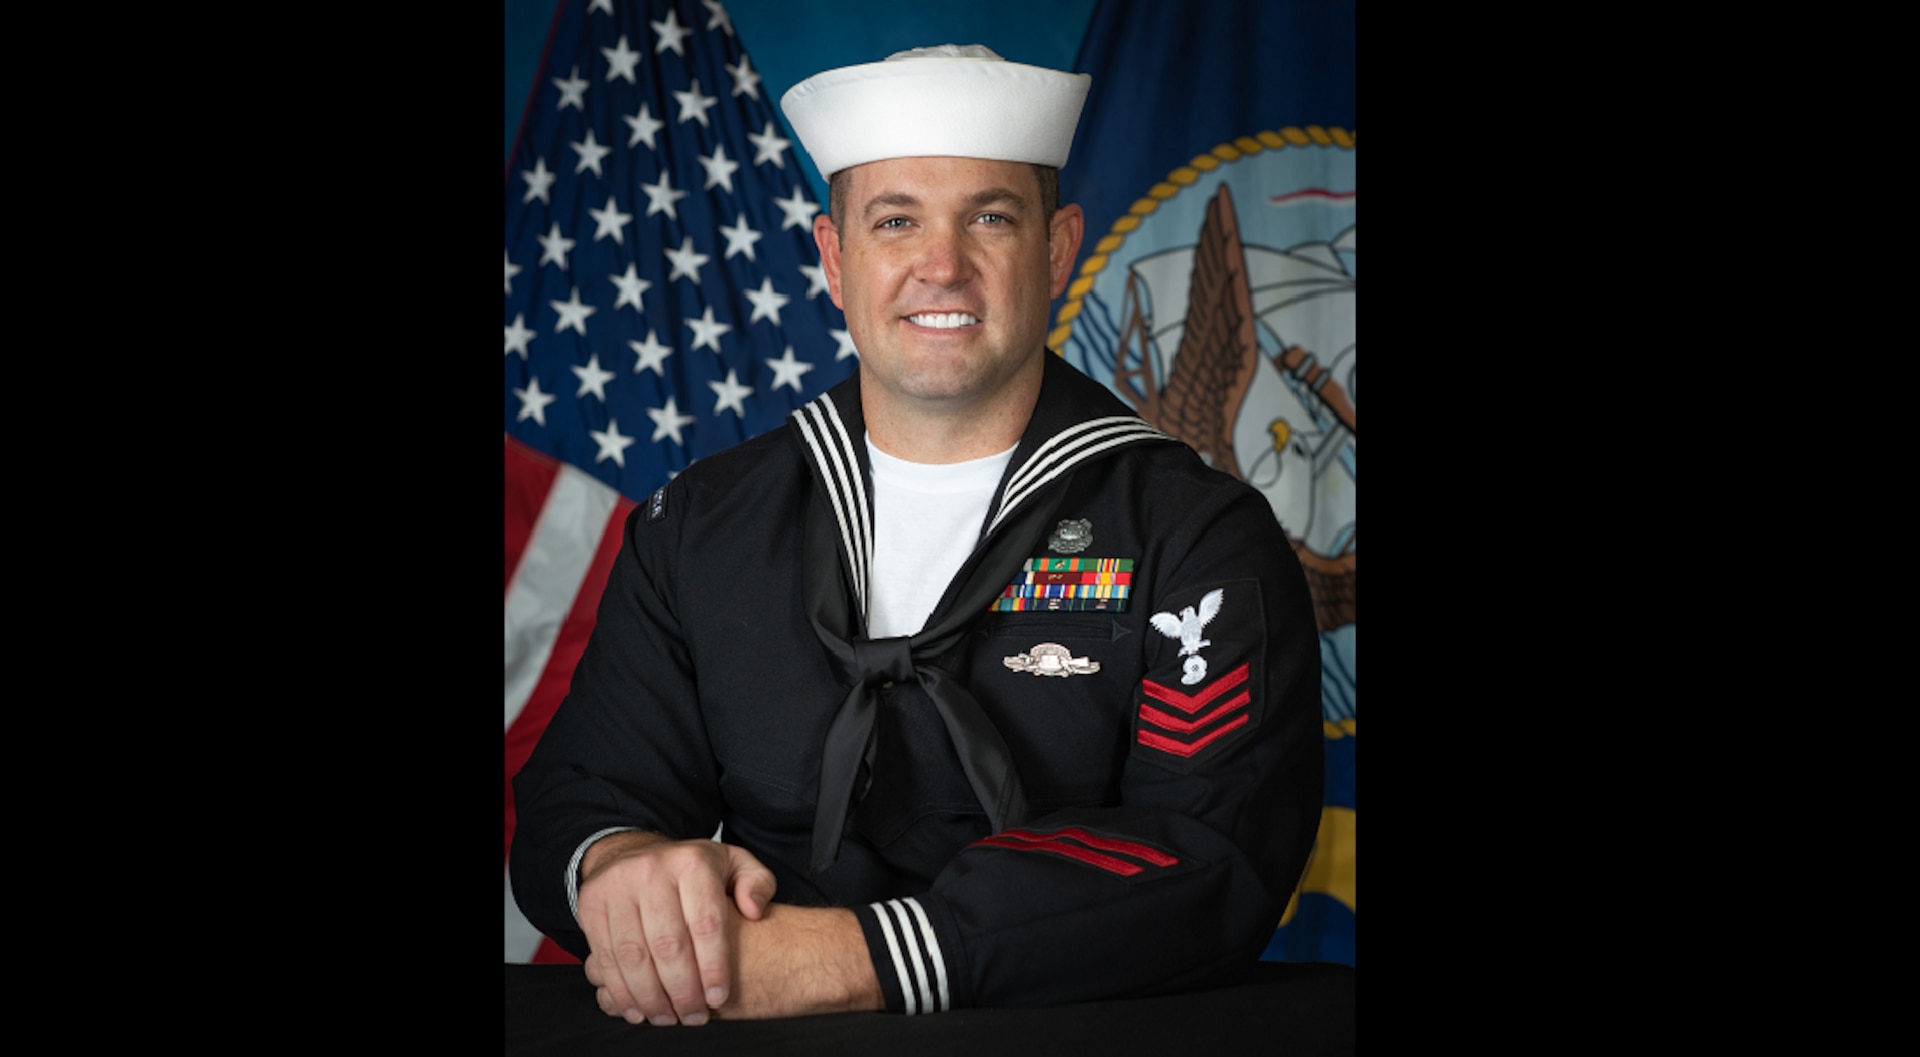 Navy Diver First Class (ND1) Cody Levins, assigned to Naval Surface Warfare Center Panama City Division (NSWC PCD) is selected as the Sailor of the Year 2021 for professional achievement in the superior performance of his duties.